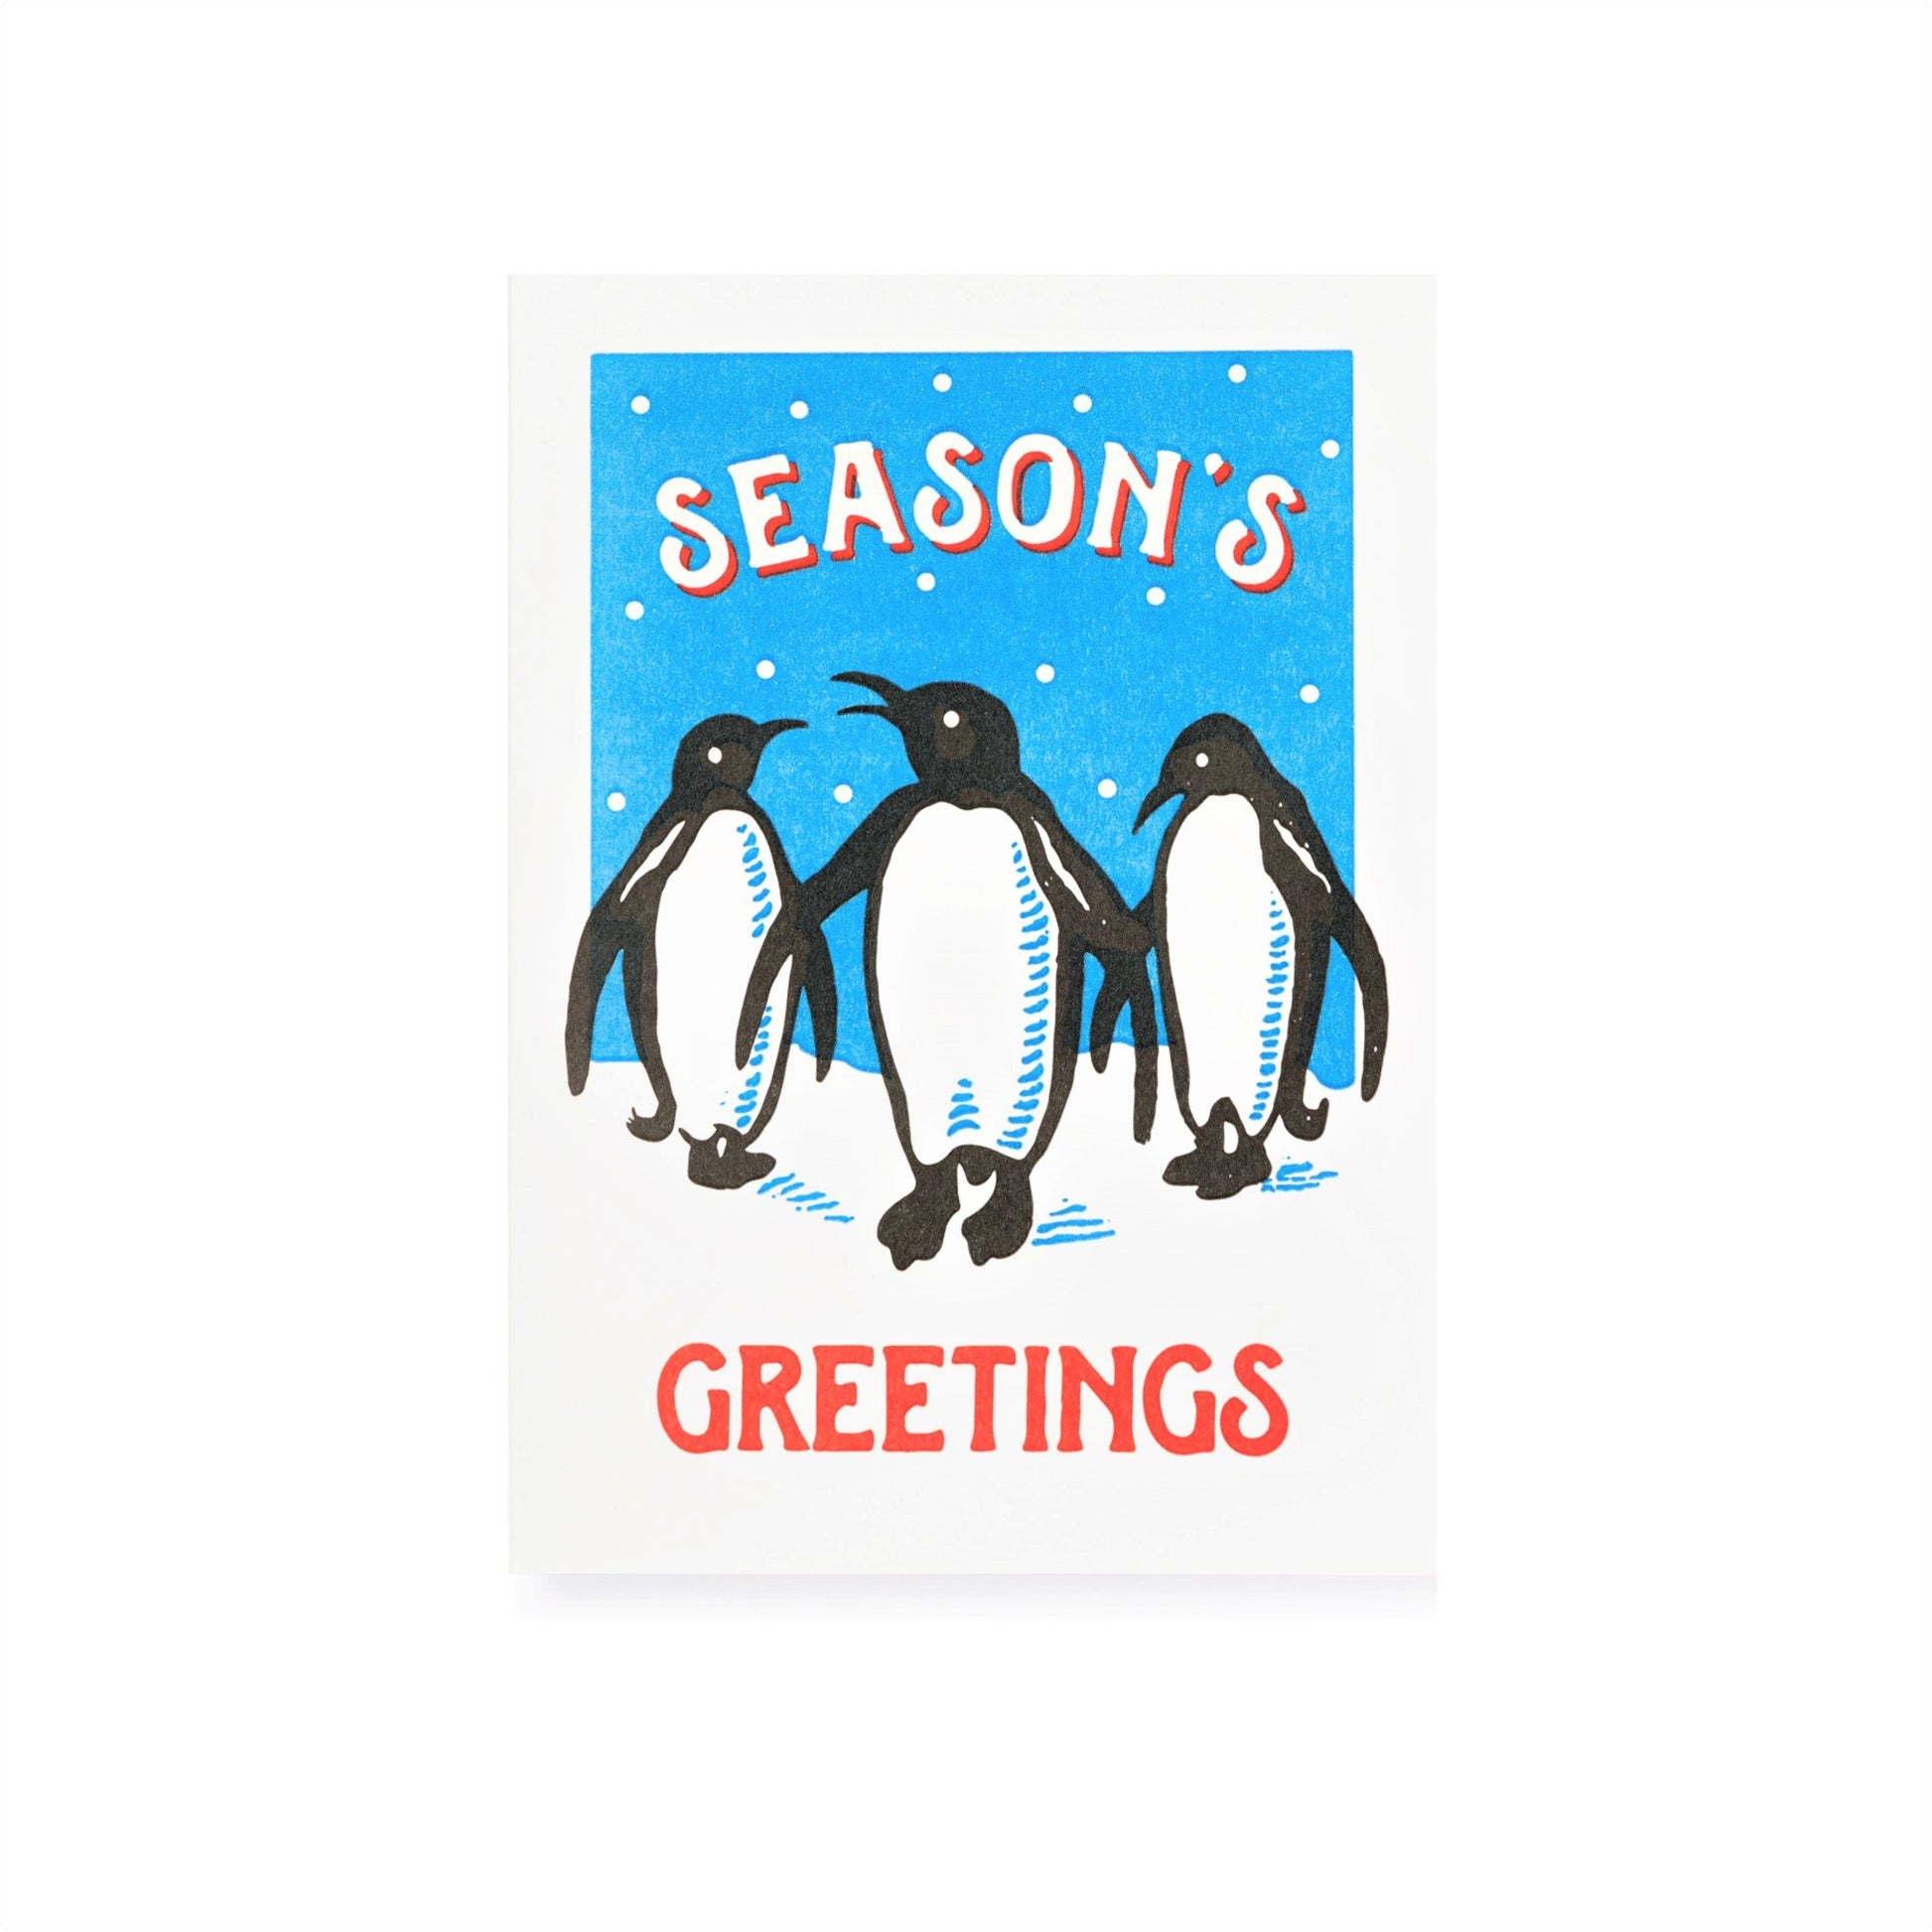 small greetings card with penguin design and season's greeting message, by Archivist Gallery